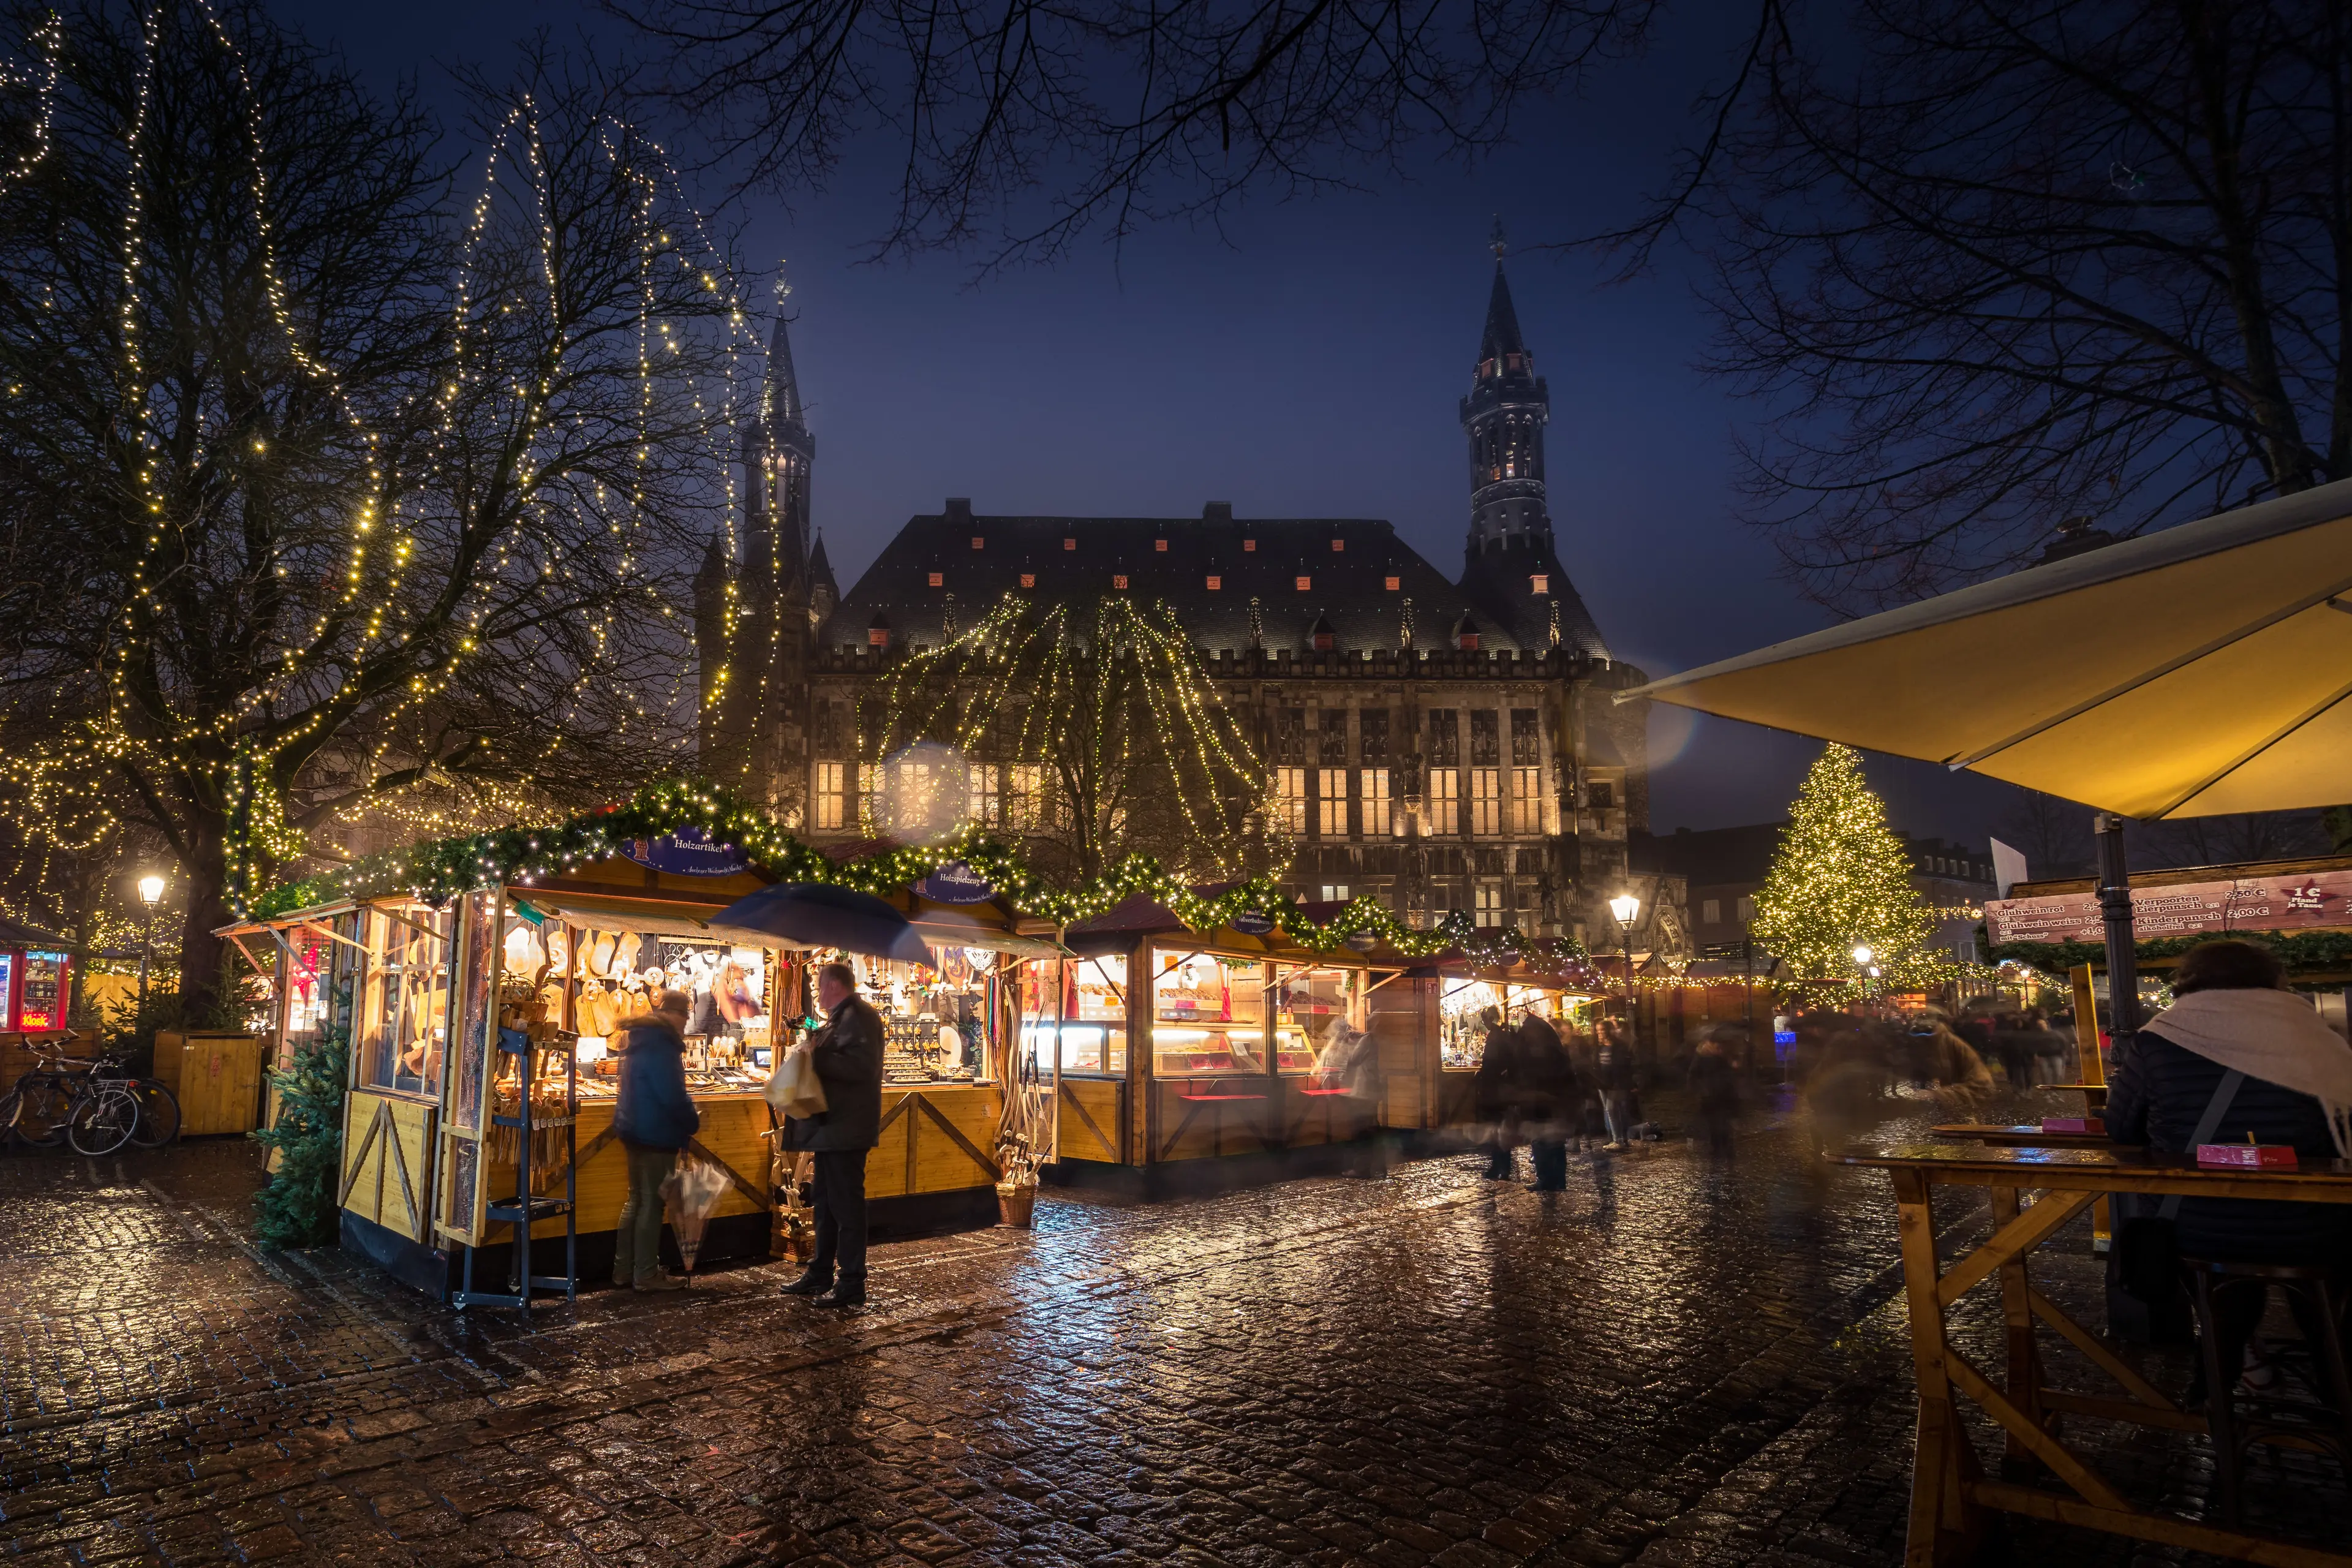 5-Day Christmas Holidays Romantic Escape to Aachen, Germany